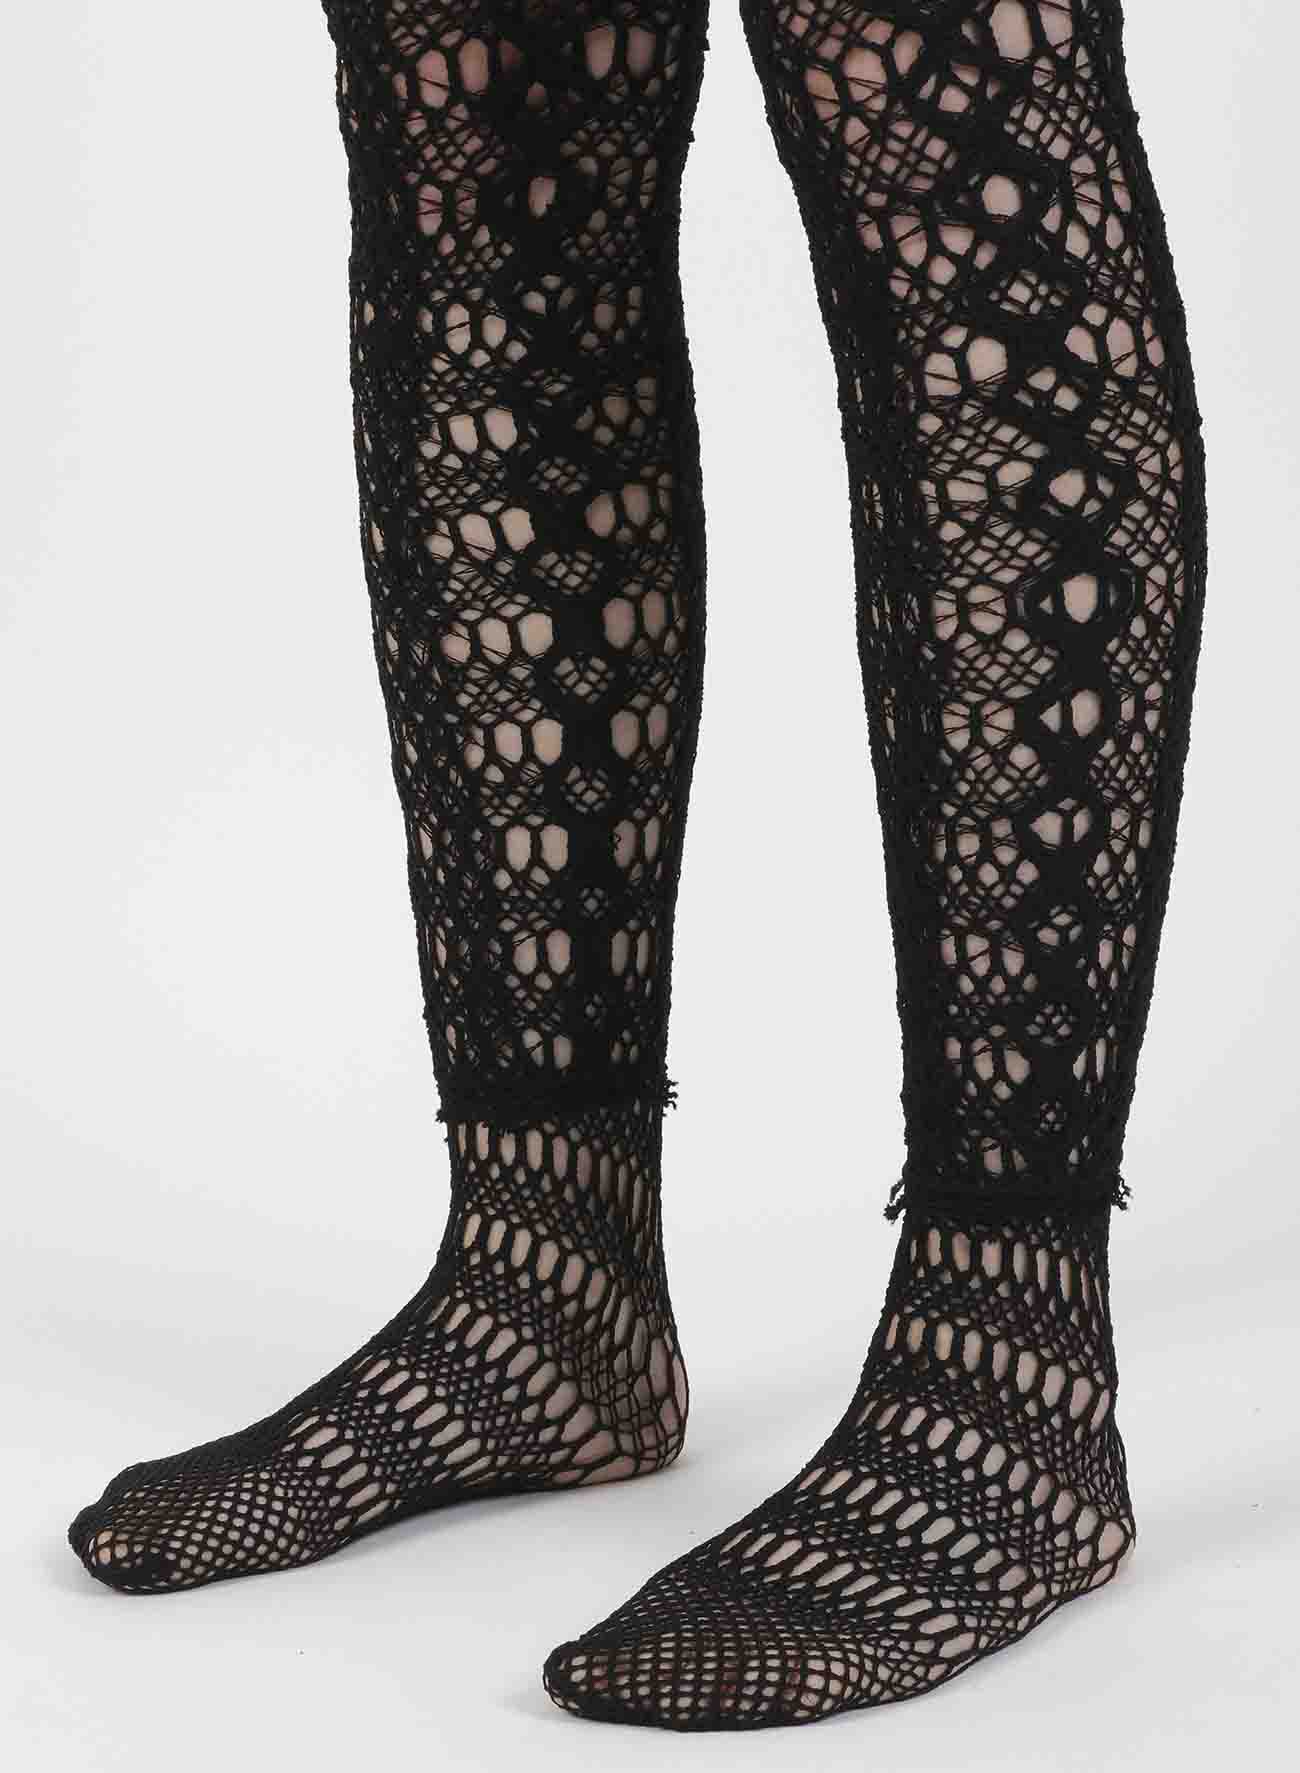 TORCHON LACE DOUBLE LAYERED LEGGINGS